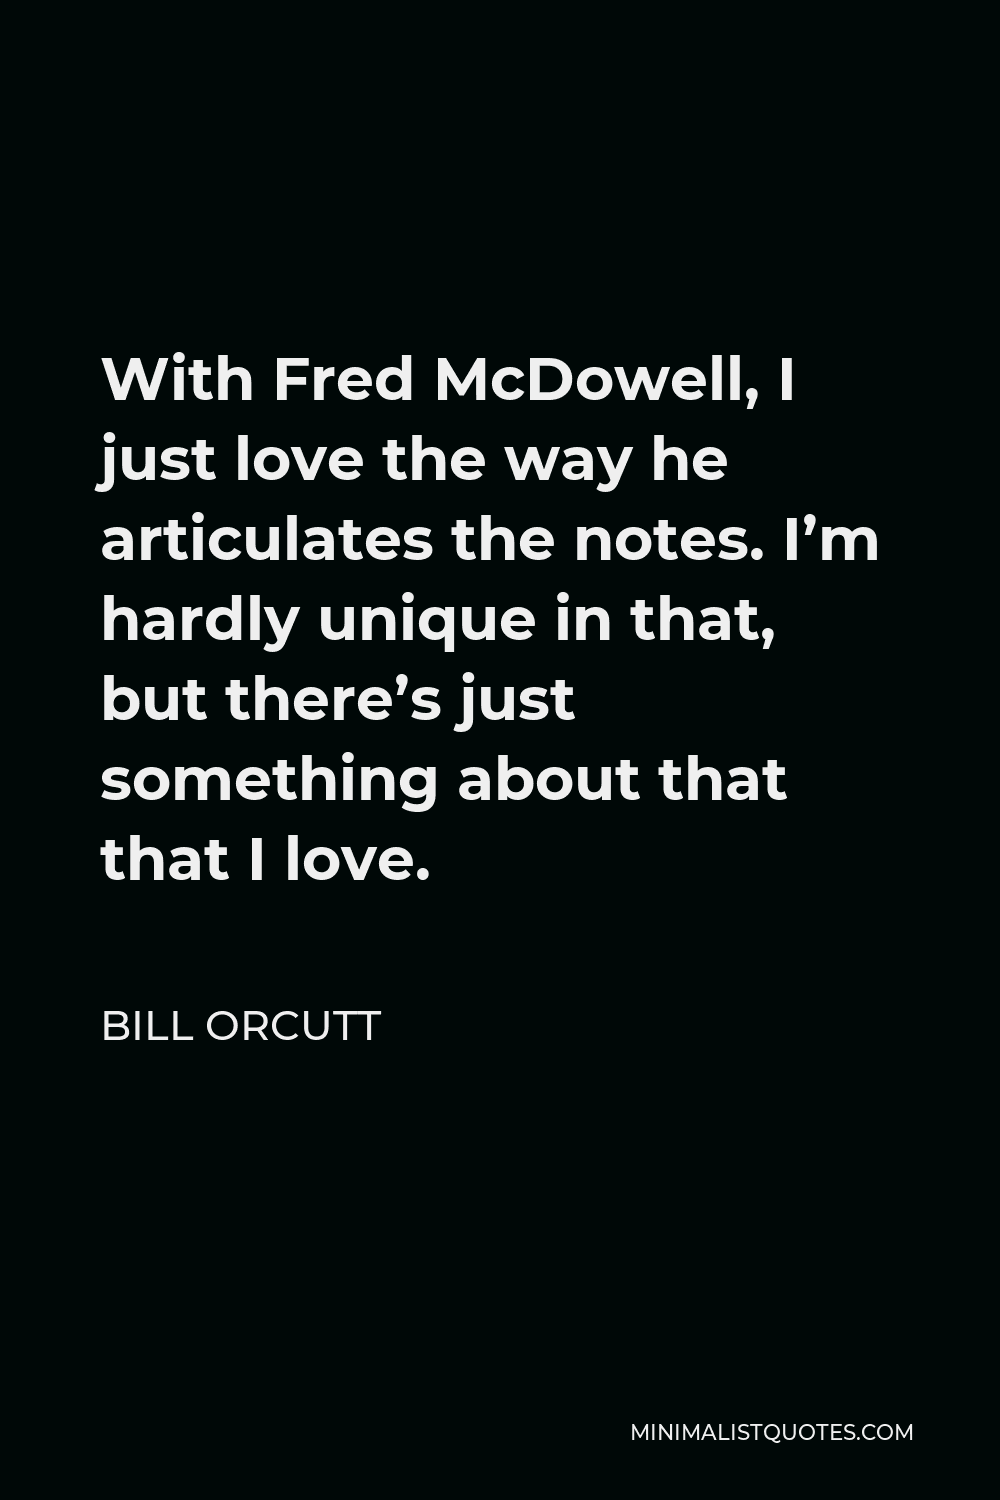 Bill Orcutt Quote - With Fred McDowell, I just love the way he articulates the notes. I’m hardly unique in that, but there’s just something about that that I love.